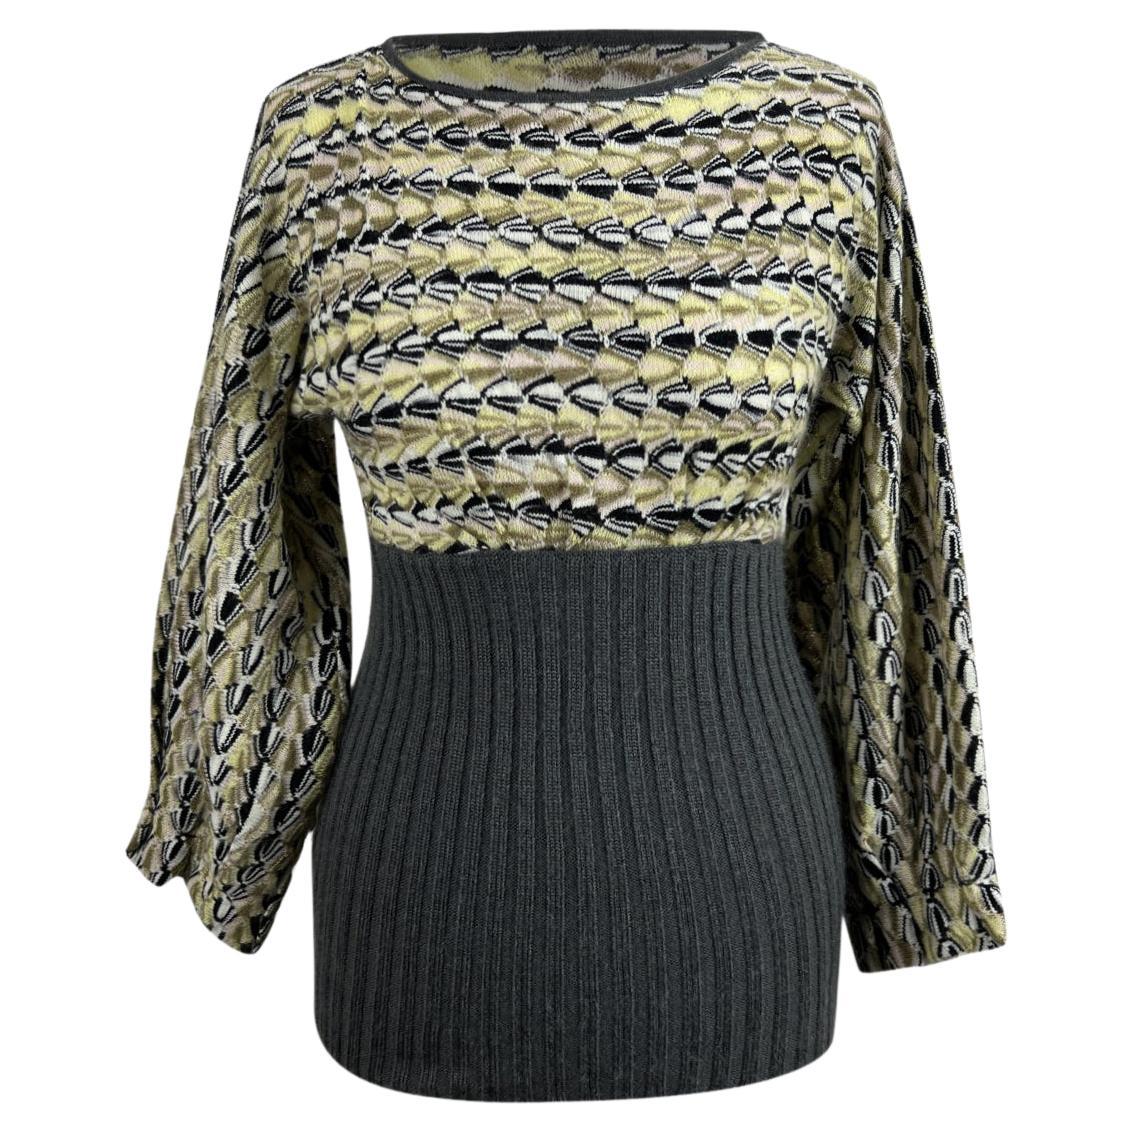 Missoni Wool and Mohair Long Sleeve Jumper Sweater Size 38 IT